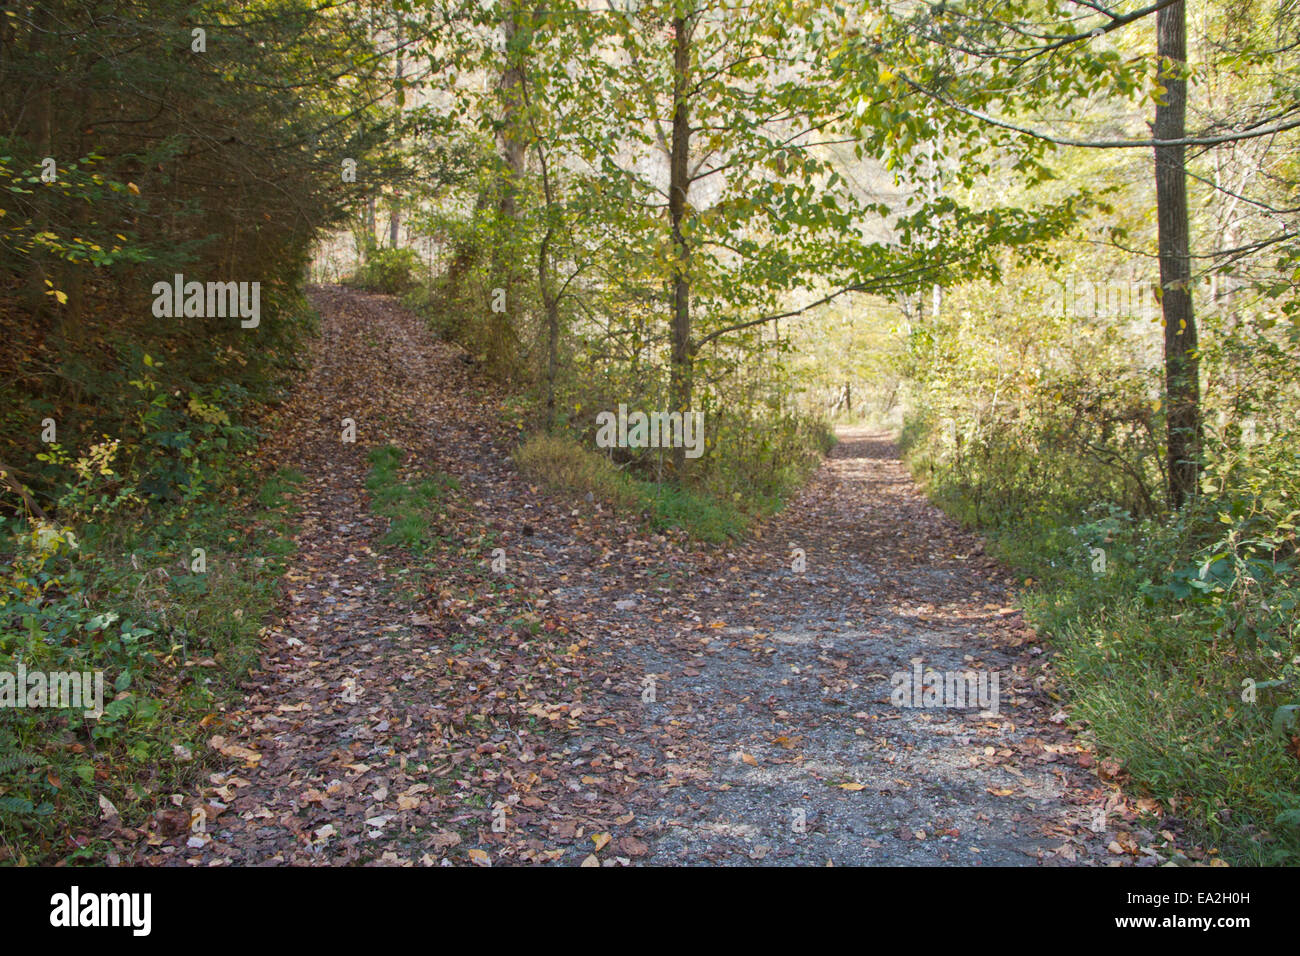 Forested path splits offering two choices on the way to go, a high road or a low road, both leading to an unknown destiny Stock Photo